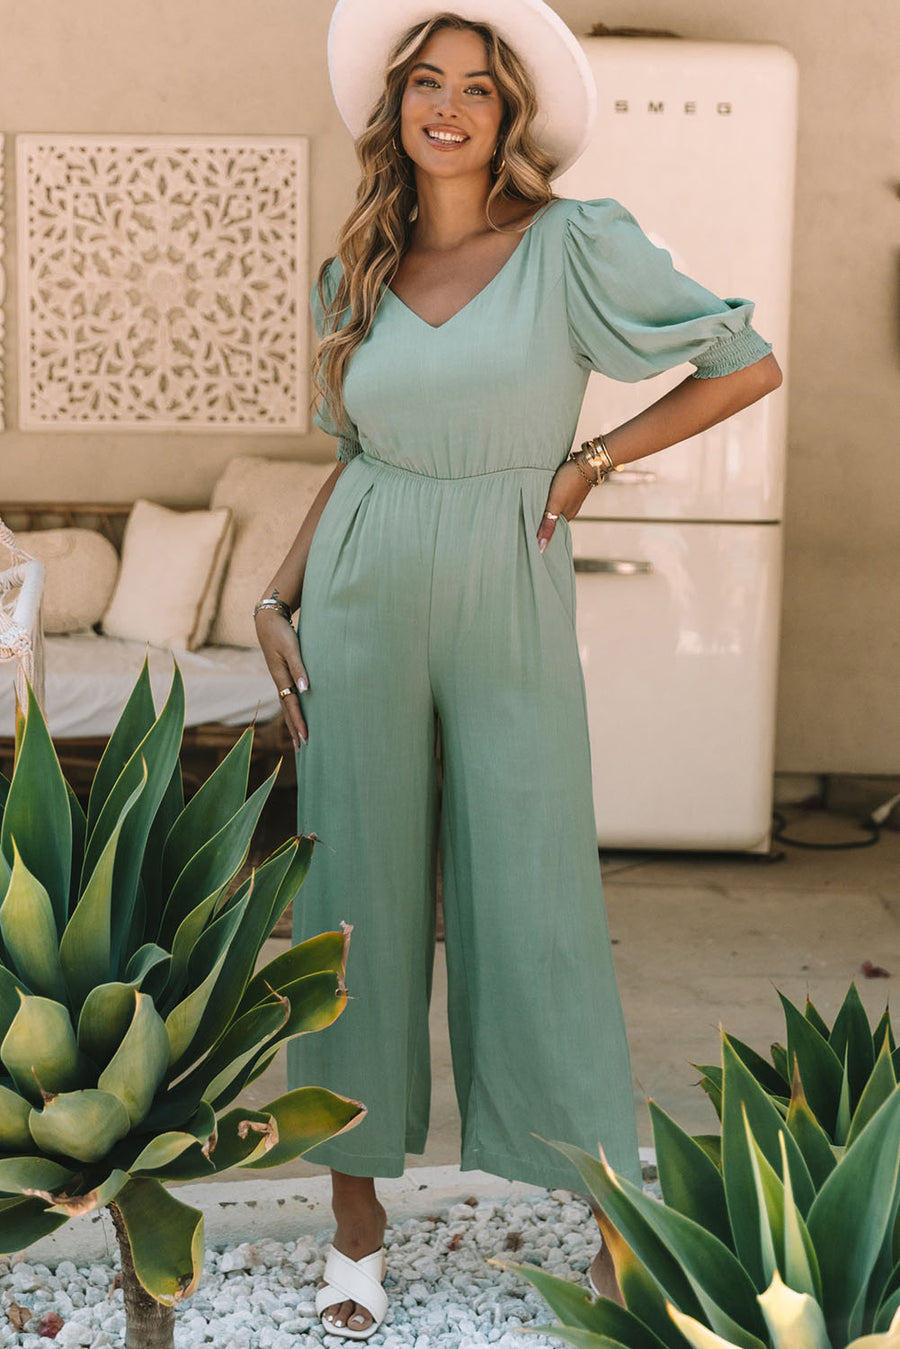 Cheap Jumpsuits & Rompers online, Buy Jumpsuits & Rompers for women at ...